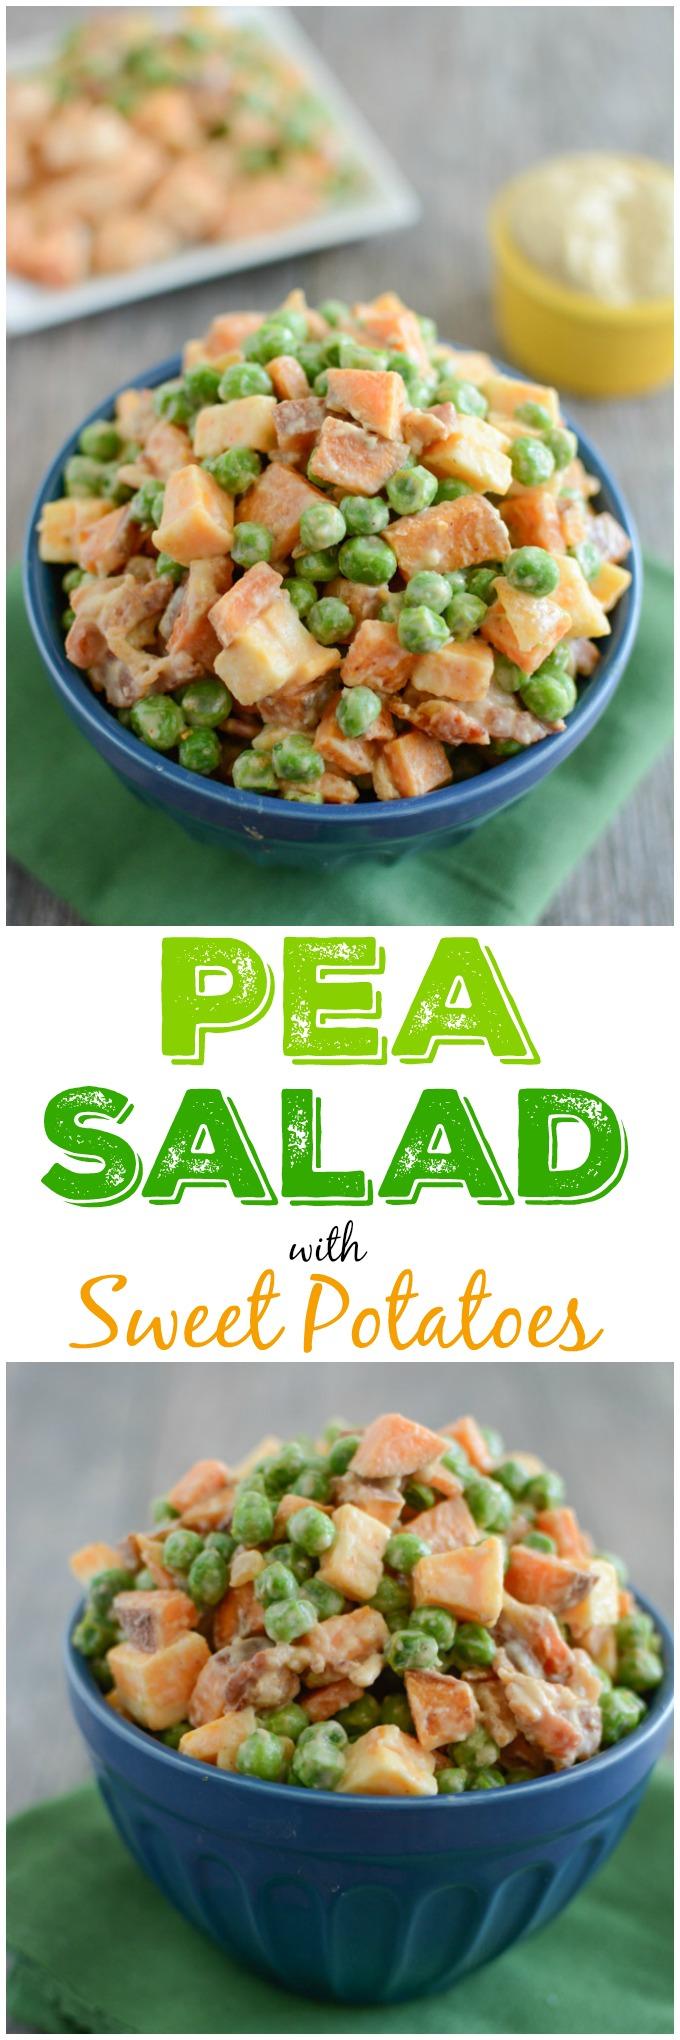 This Pea Salad with Sweet Potatoes is a healthy, kid-friendly recipe the whole family will love for dinner. Covered in hummus and mixed with bacon and cheese, what's not to love about this side dish?